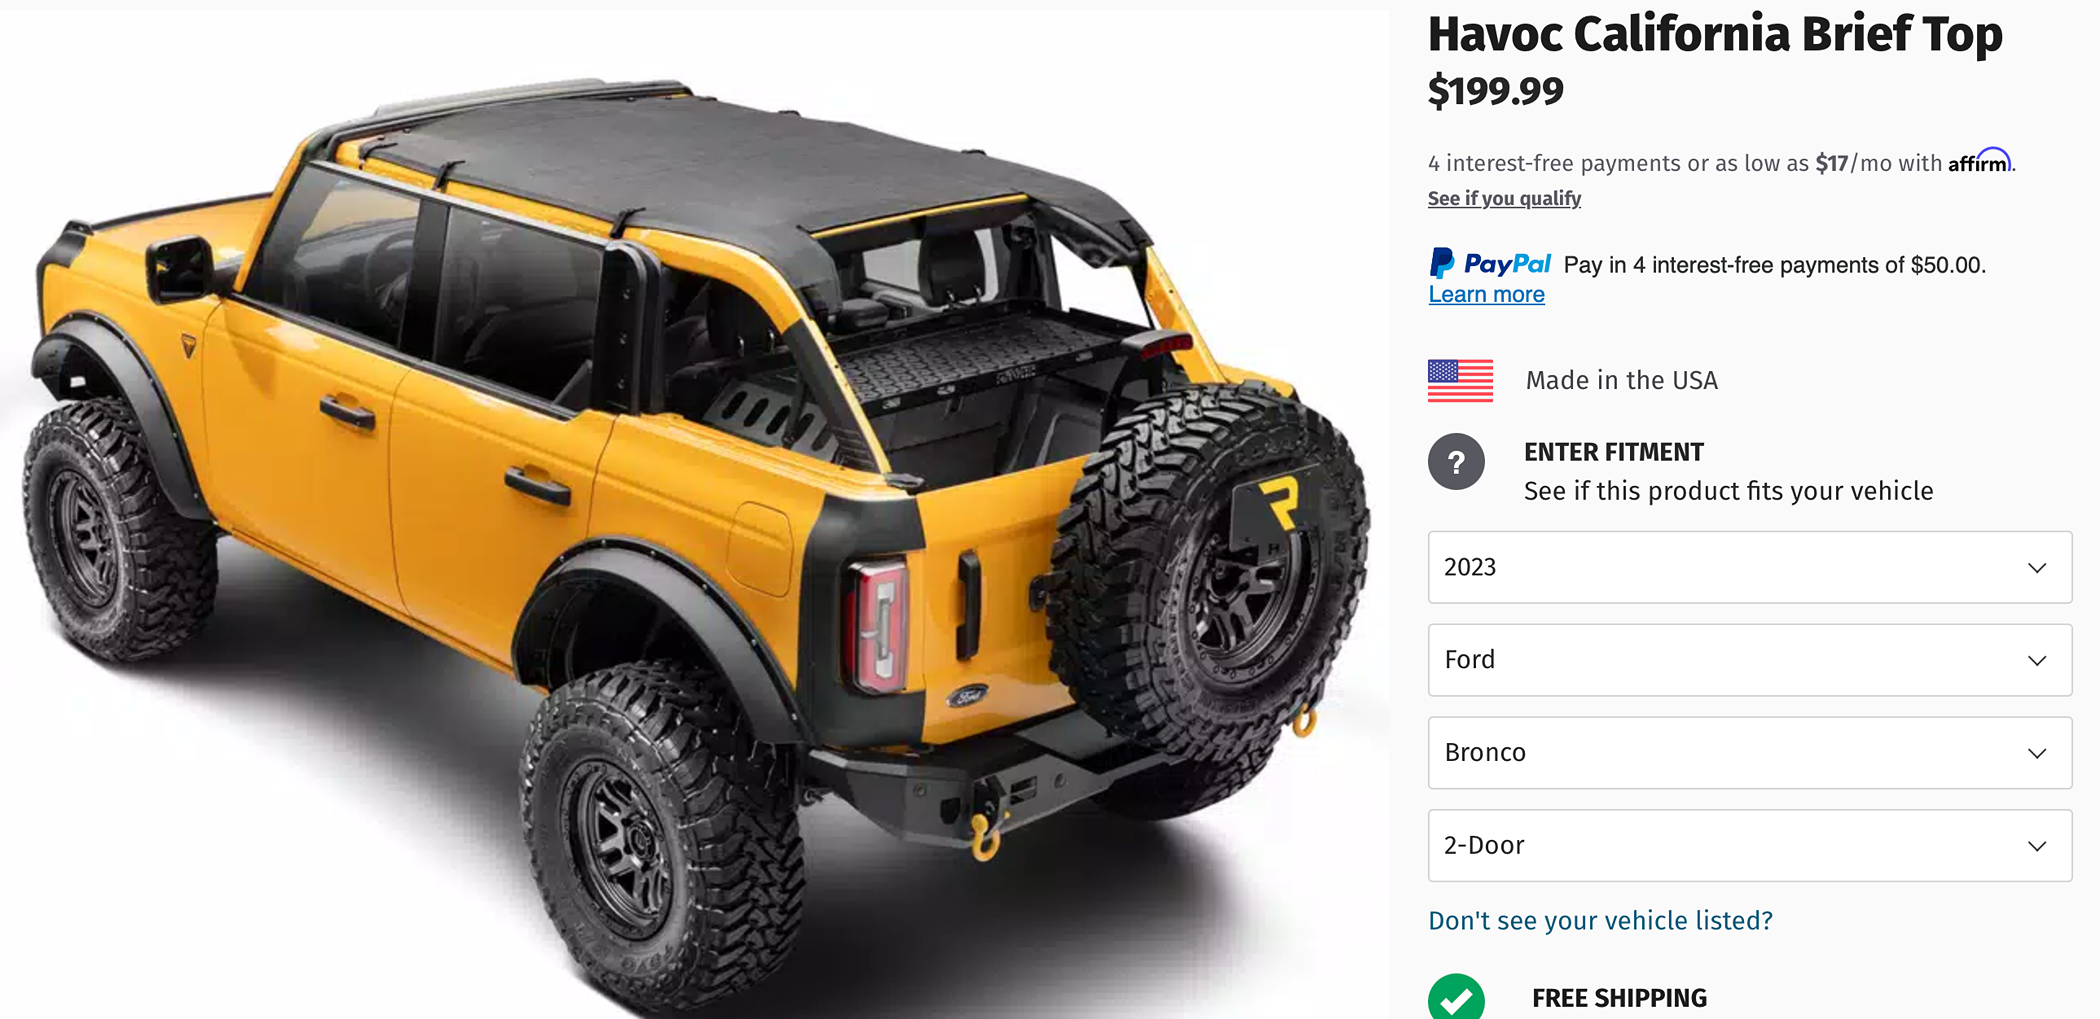 Ford Bronco Now Available: HAVOC Offroad® California Brief Top 1711993761396-1h